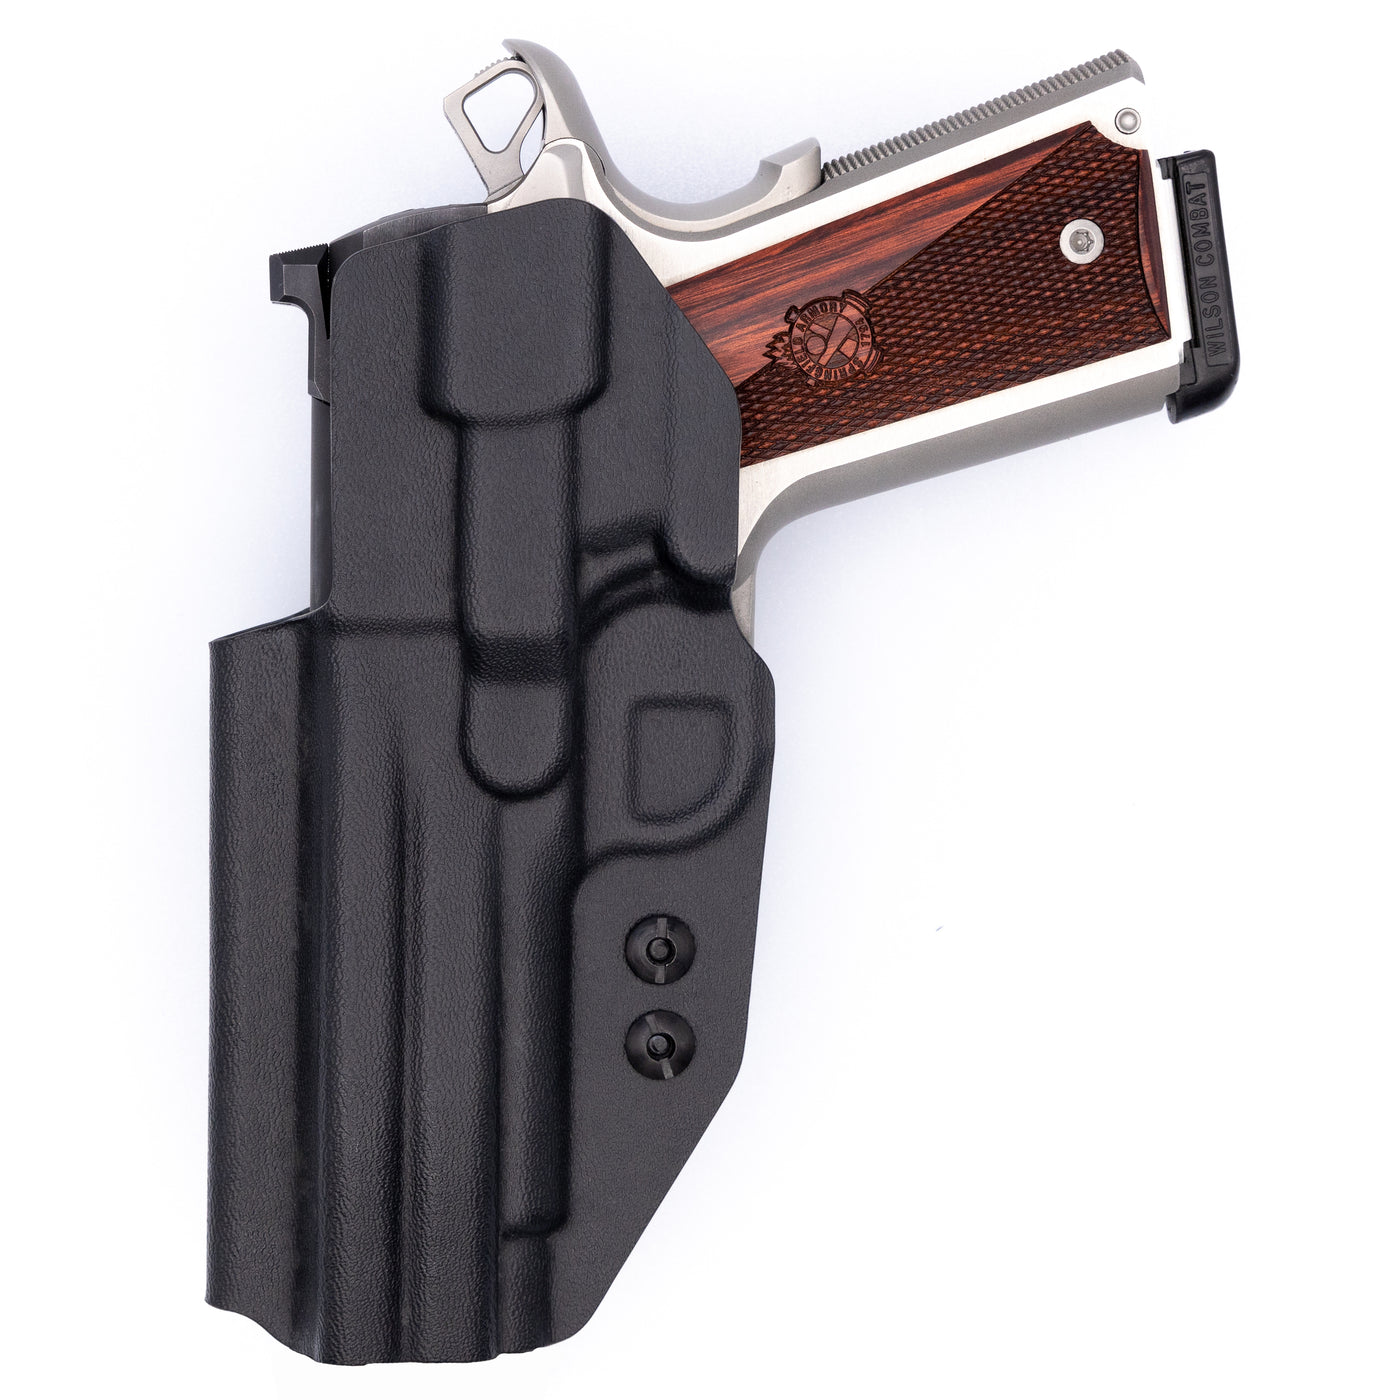 Shown is a custom C&G Holster Covert series inside the waistband holster for a Ruger SR1911.